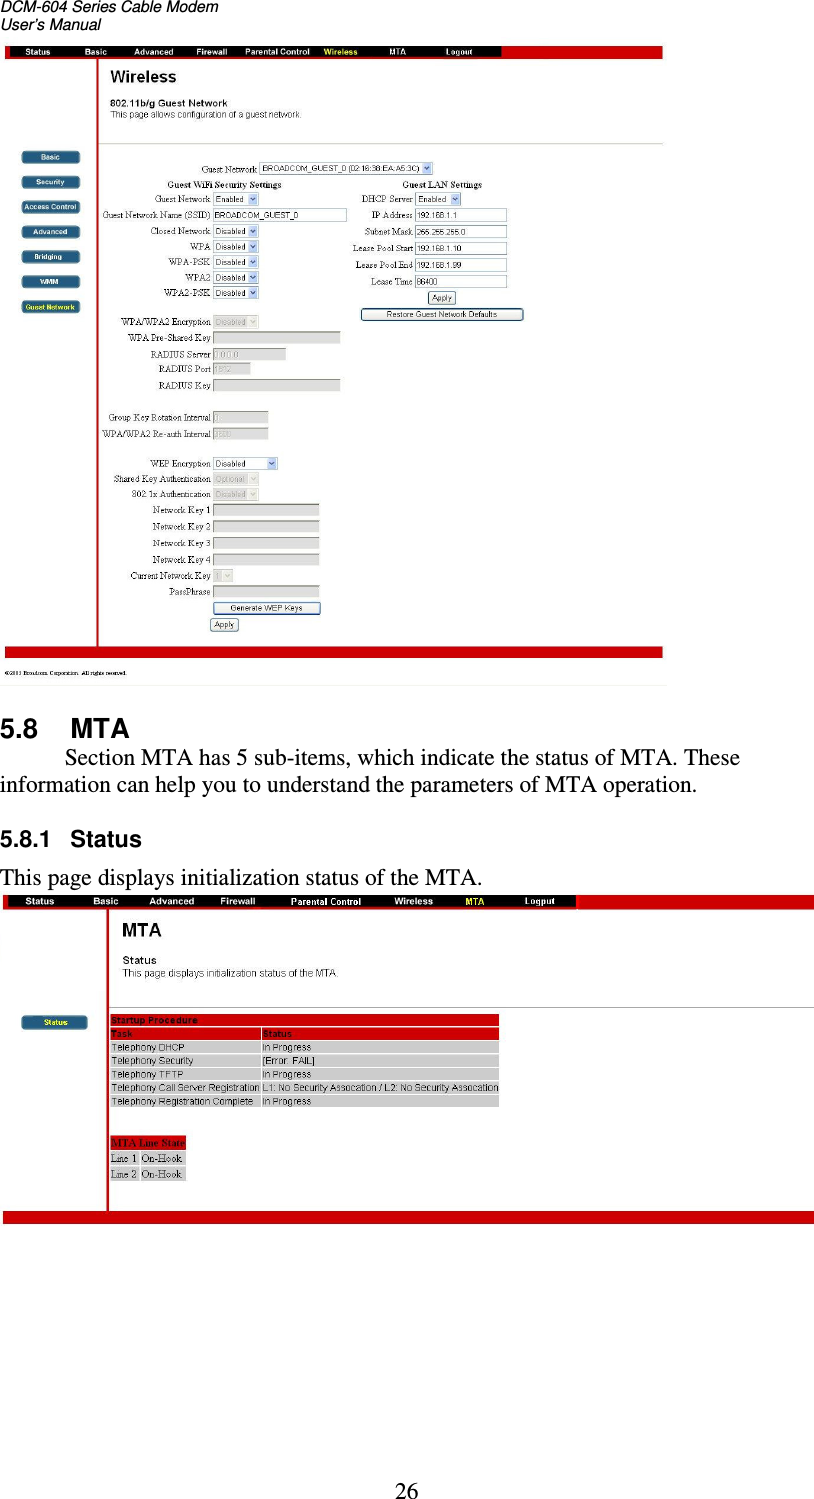 DCM-604 Series Cable Modem  User’s Manual 26   5.8  MTA            Section MTA has 5 sub-items, which indicate the status of MTA. These information can help you to understand the parameters of MTA operation.  5.8.1  Status This page displays initialization status of the MTA.   